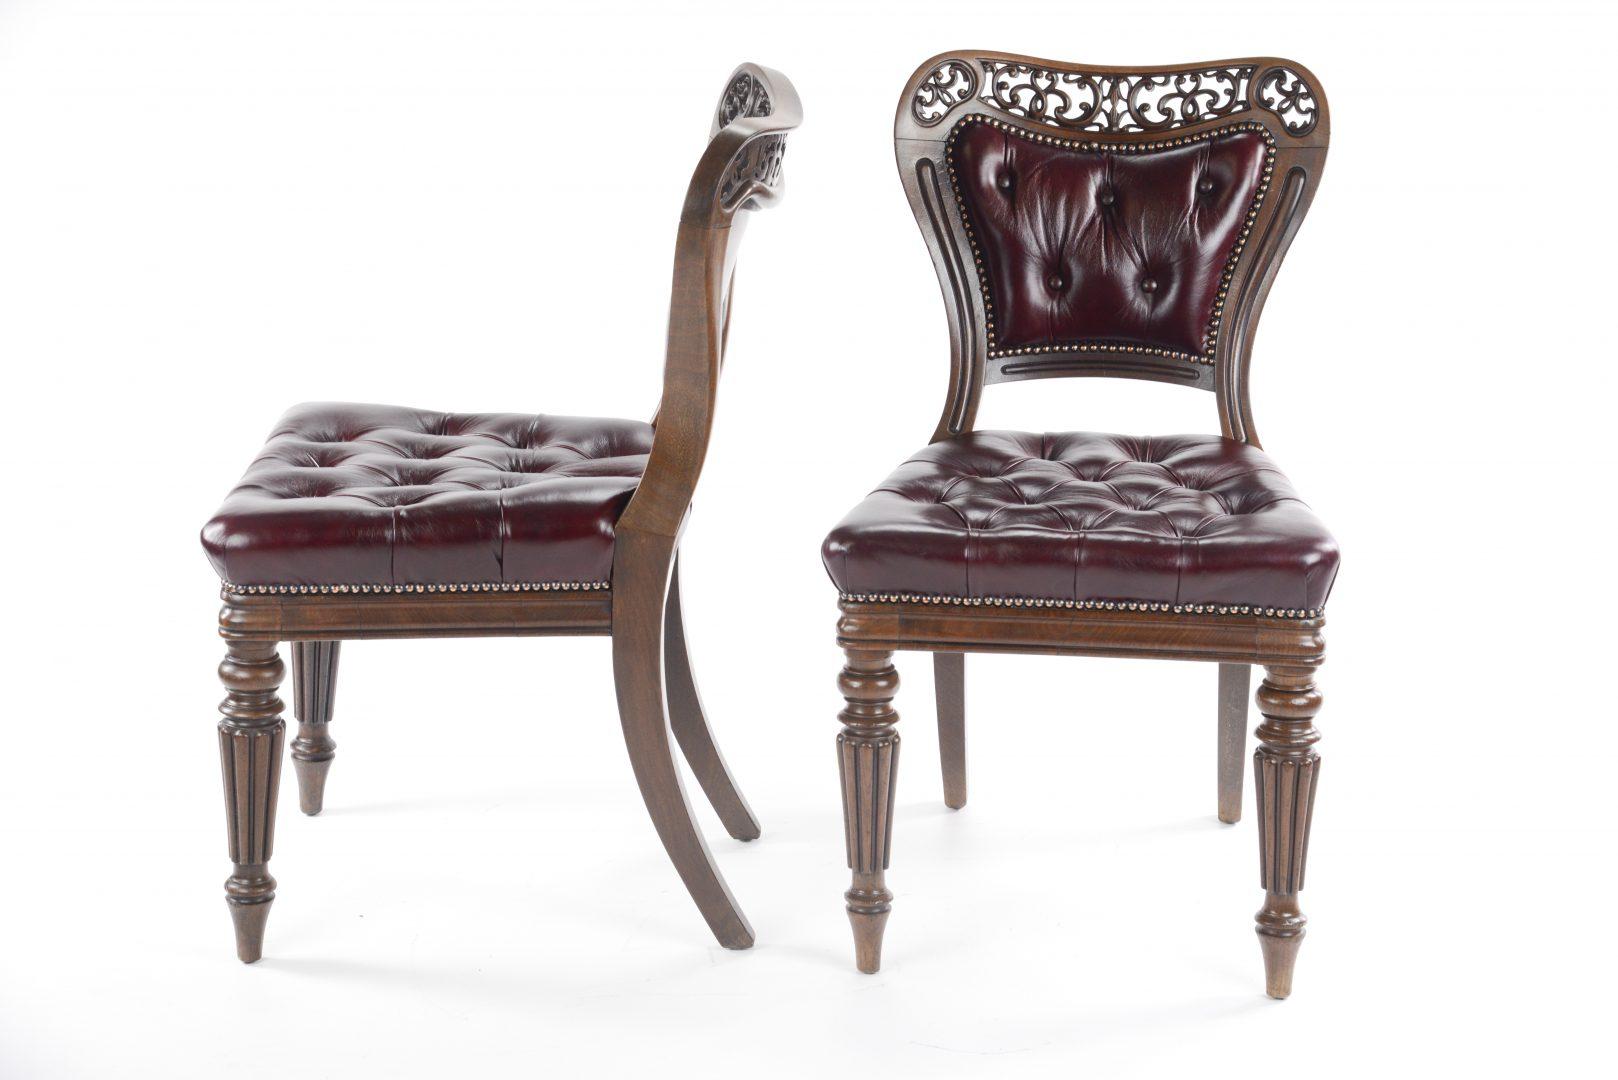 A very fine quality pair of George IV mahogany library chairs, firmly attributed to Gillows, pierced back rails and sides, in deep buttoned maroon leather backs and seats.


Gillows of Lancaster and London, also known as Gillow & Co., was an